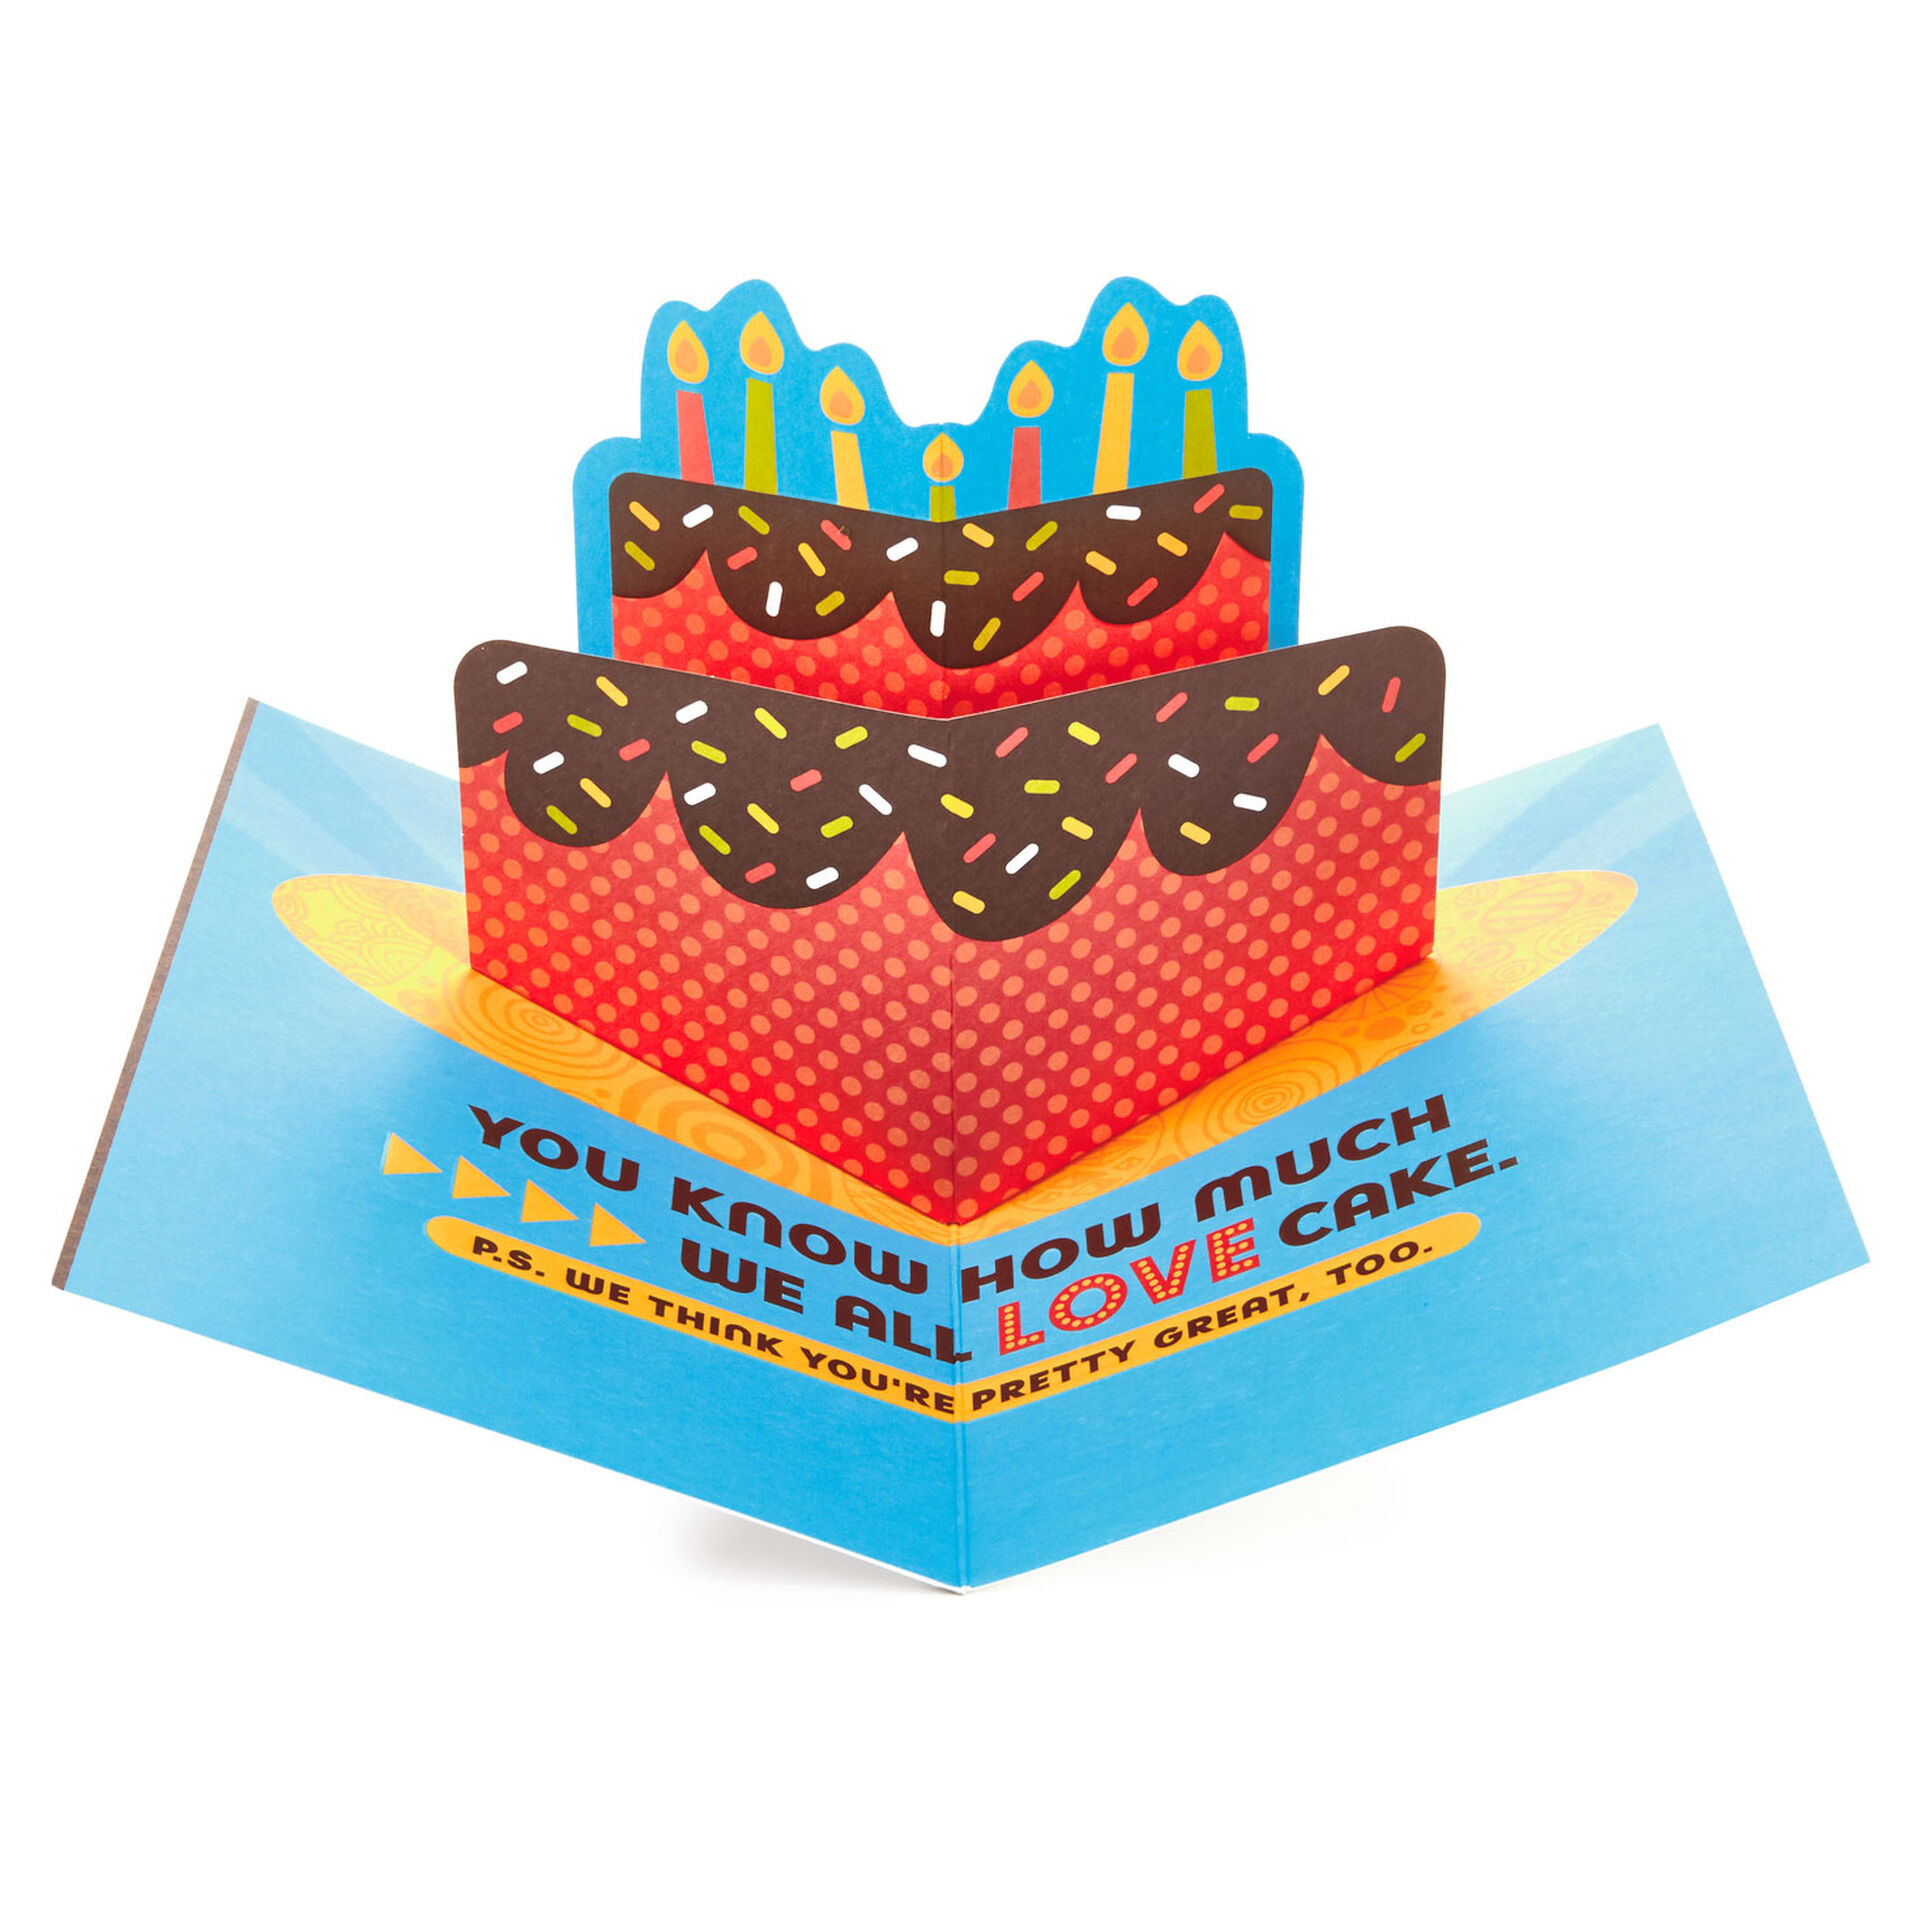 Cake and Candles Pop Up Birthday Card for Nephew - Greeting Cards ...